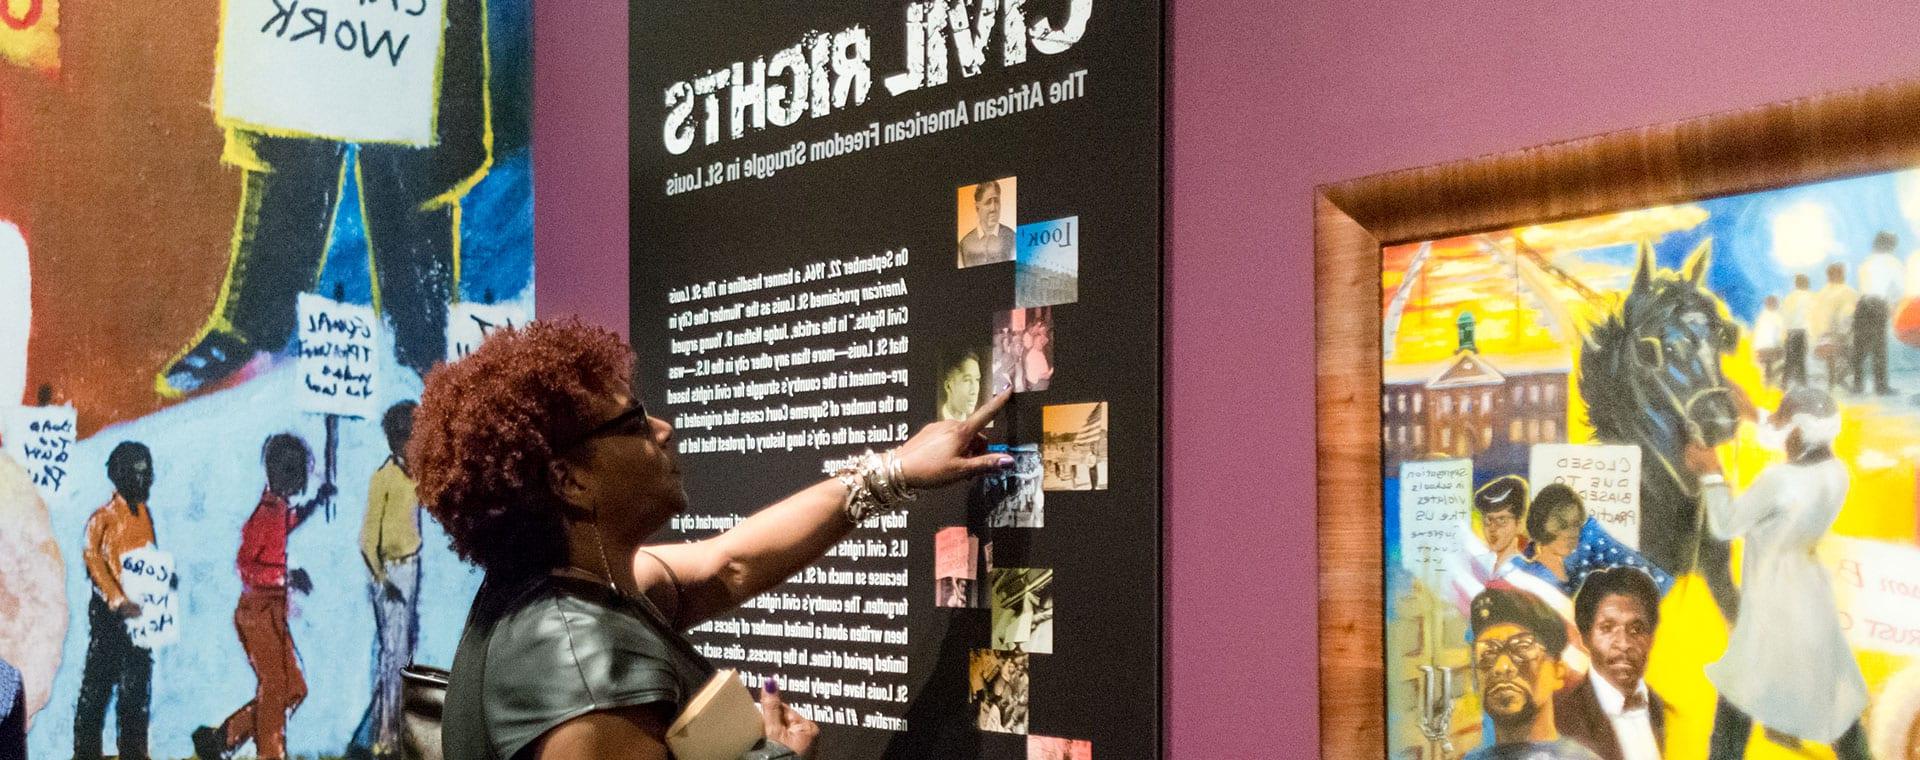 Maryville sponsors Civil Rights exhibit at Missouri History Museum